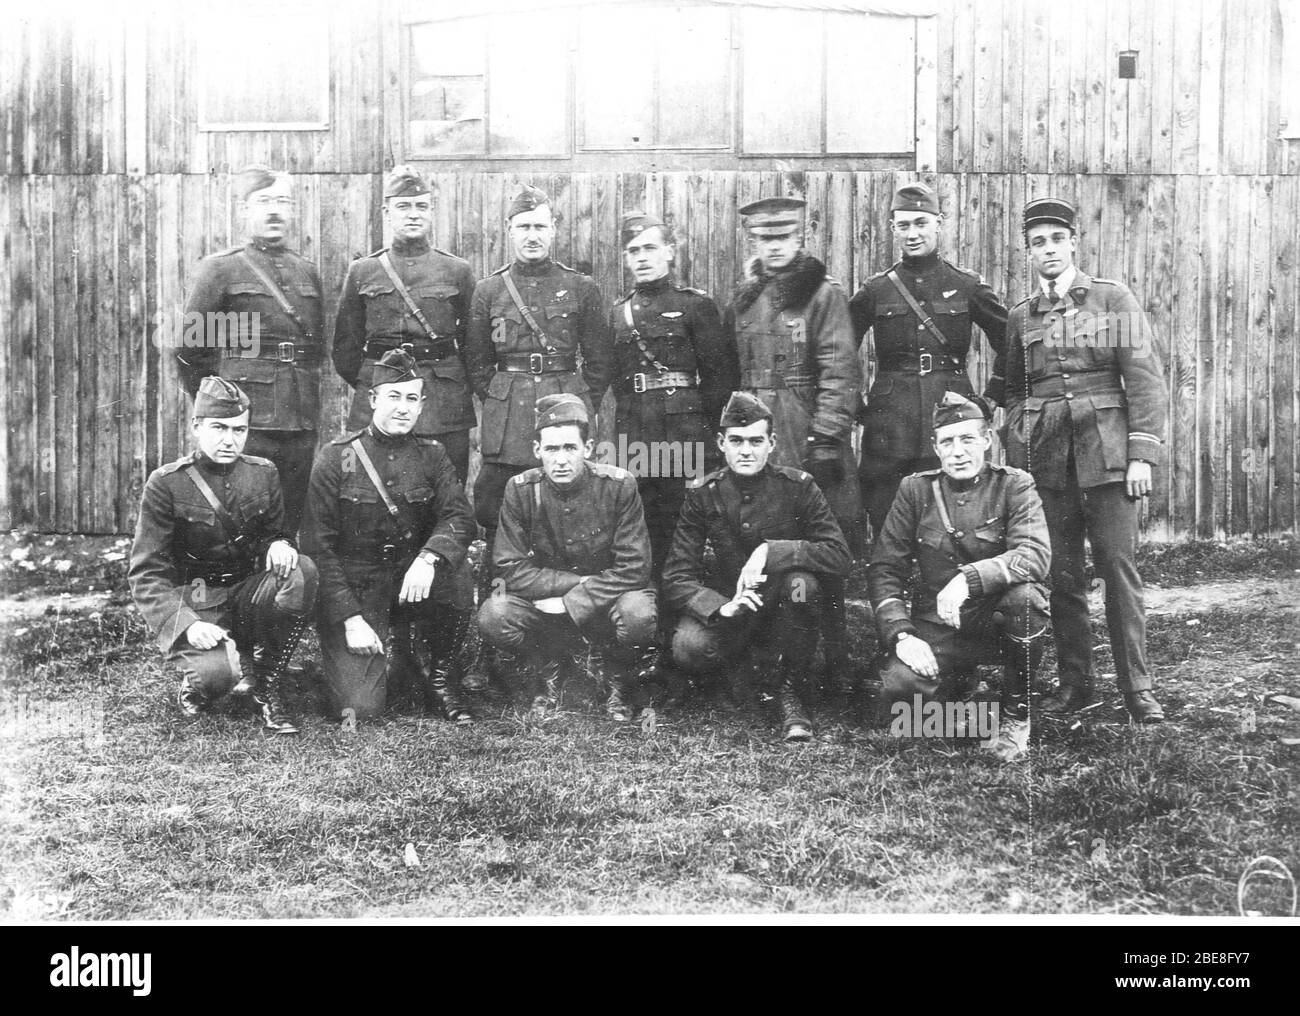 "English: 12th Aero Squadron - Officers Gengault Aerodrome, Toul, France September 1918; 1918; US National Archives, Gorrells Geschichte des American Expeditionary Forces Air Service, Series N Volume 17 Histories of I Corps Observation Group und 1., 12. Und 50. Aero Squadron Operations über http://www.fold3.com; Luftdienst, Foto der United States Army; ' Stockfoto